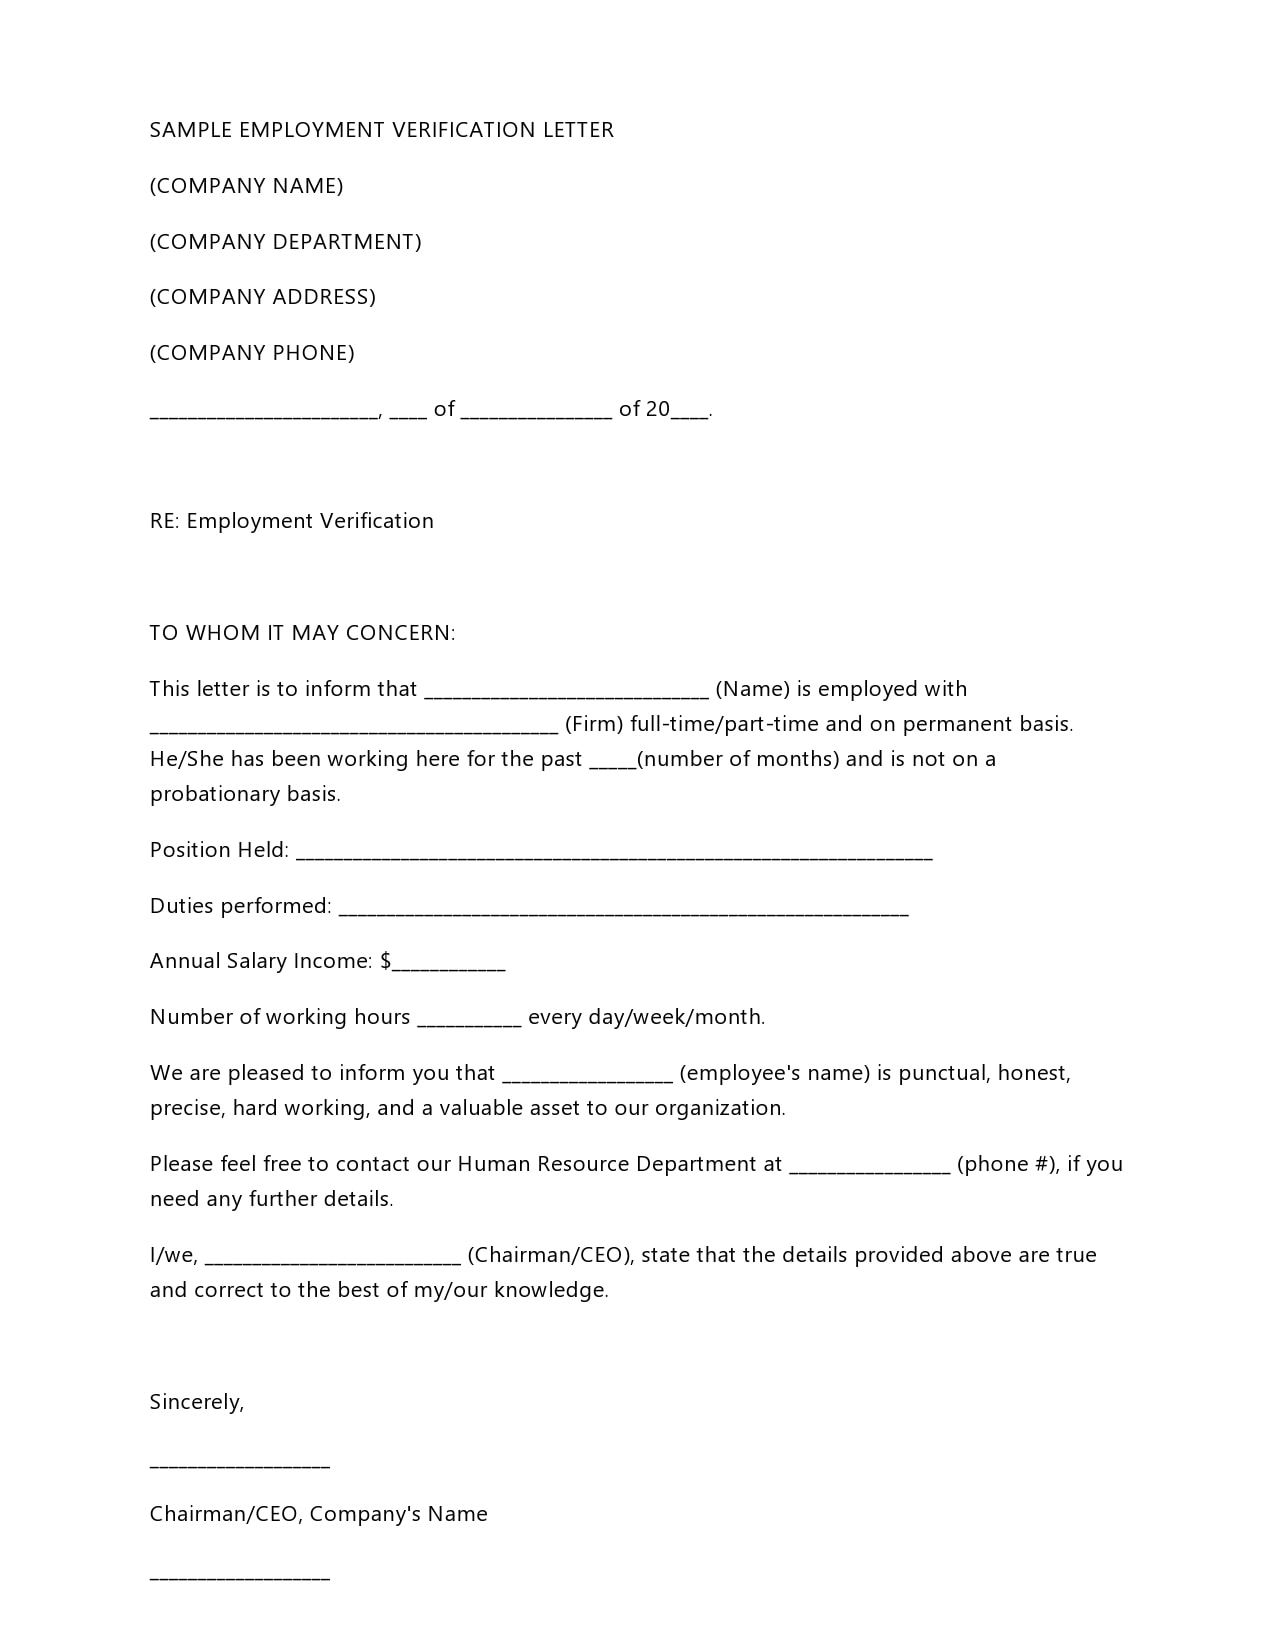 Request For Employment Verification Letter Sample from templatearchive.com